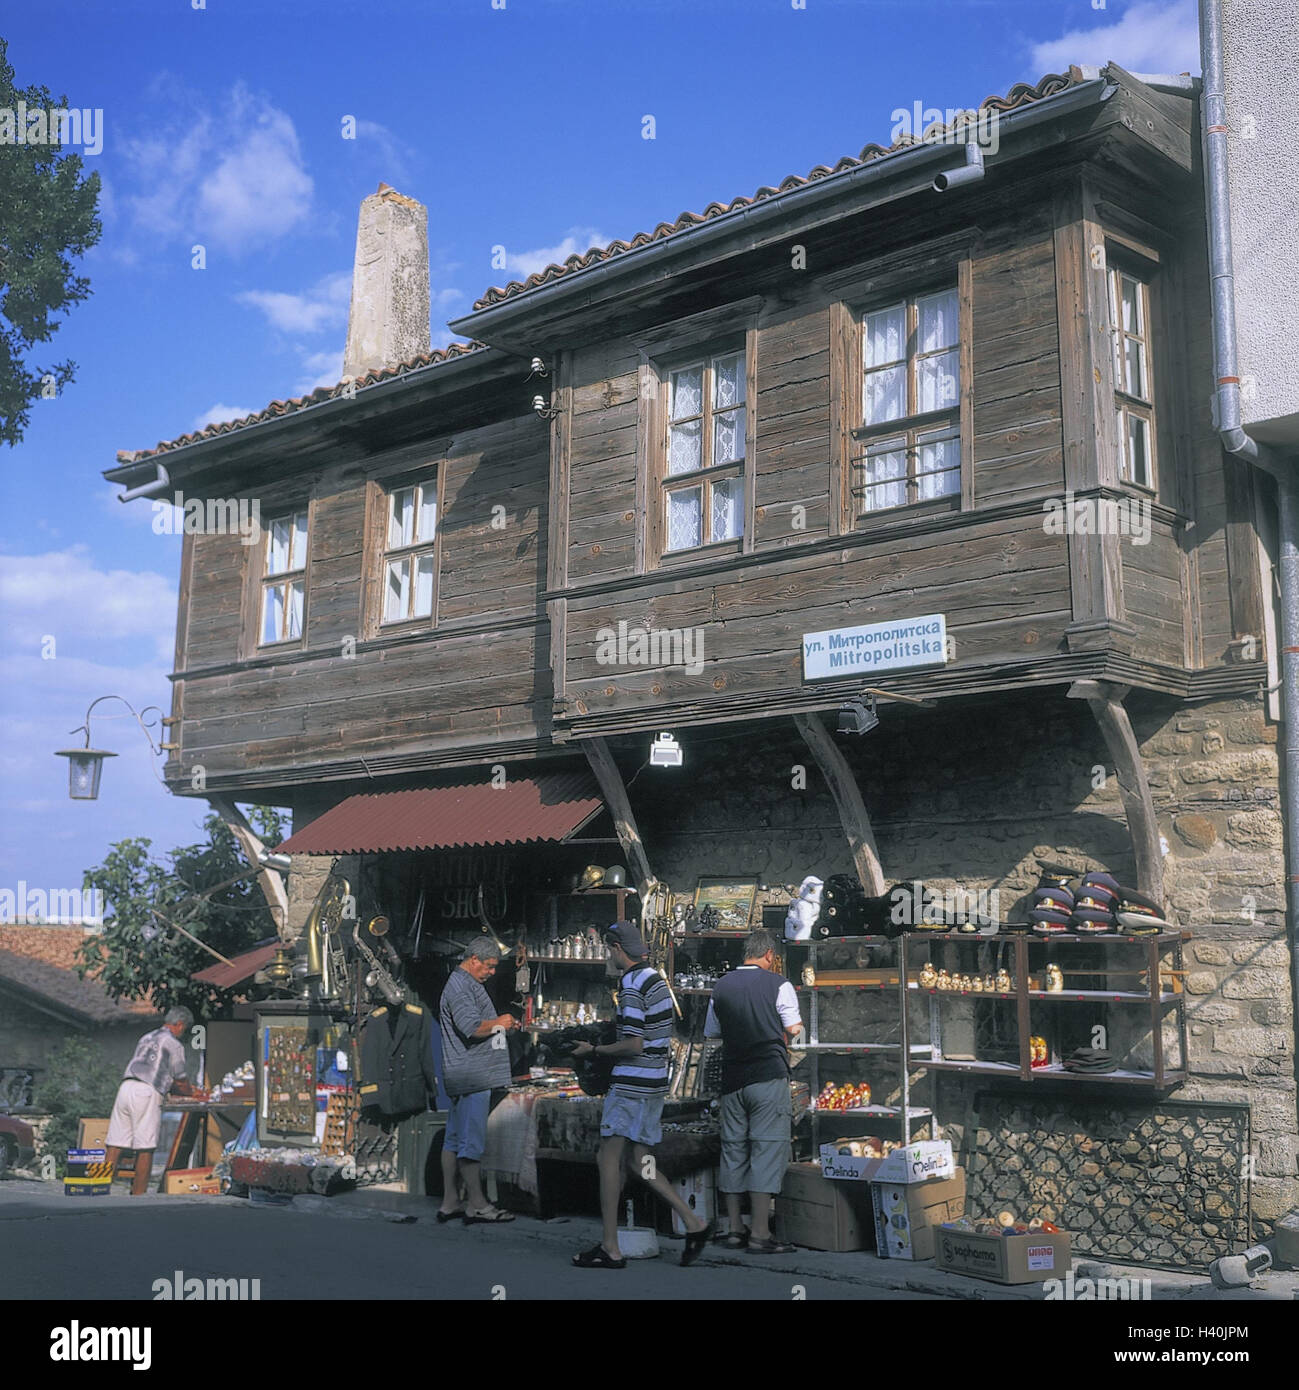 Bulgaria, Nesebar, Old Town, wooden house, sales, souvenirs, Southeast, Europe, Nessebar, architectural style, traditionally, souvenir sales, antiques, economy, trade, local, men, outside Stock Photo